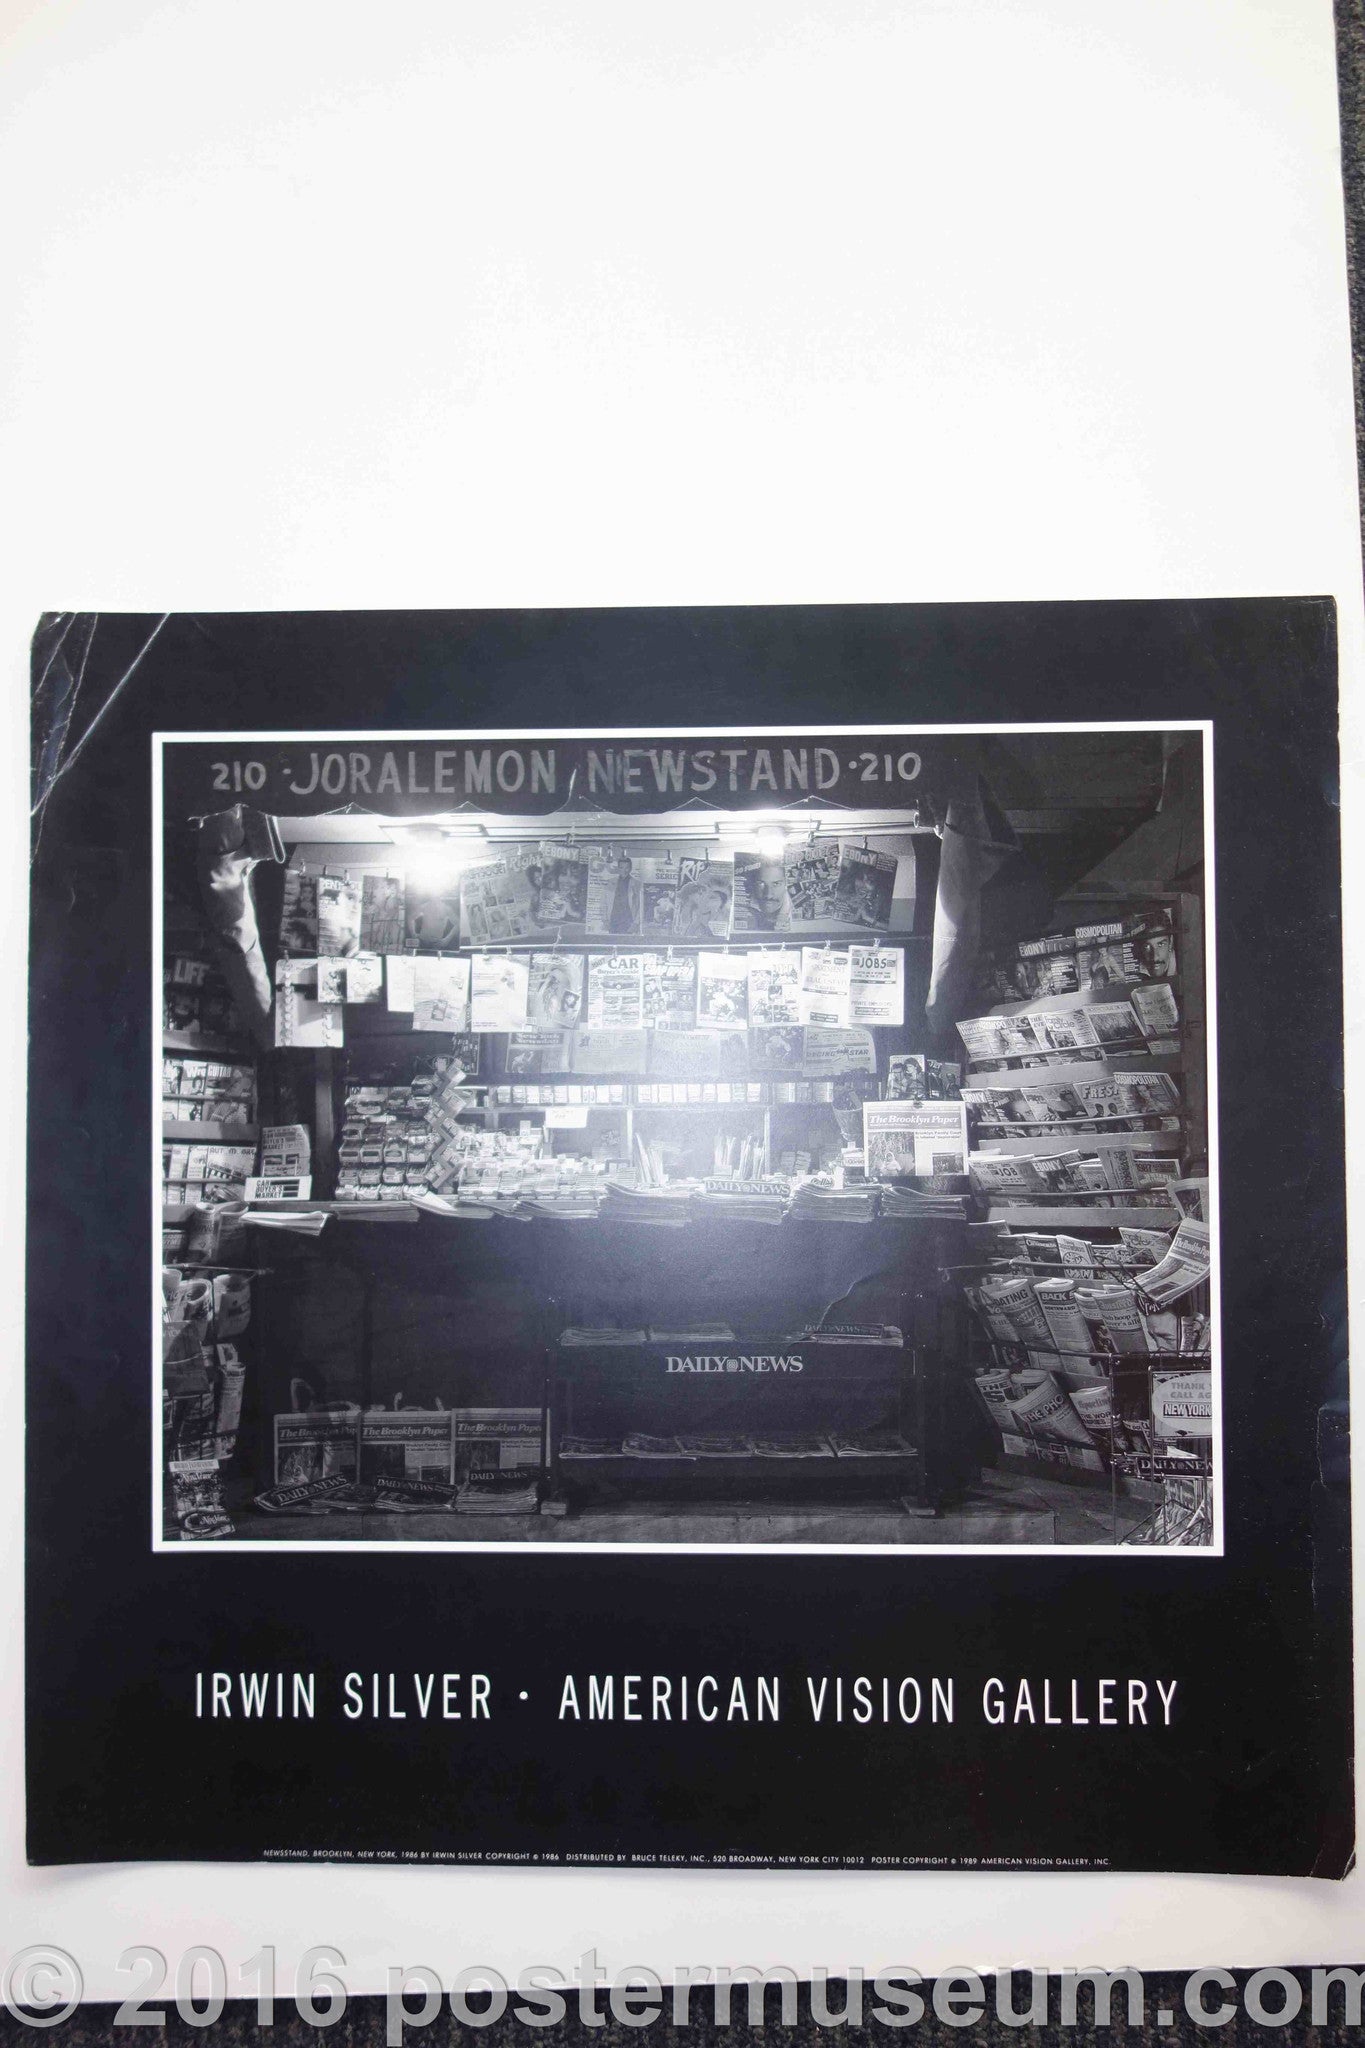 Irwin Silver - American Vision Gallery